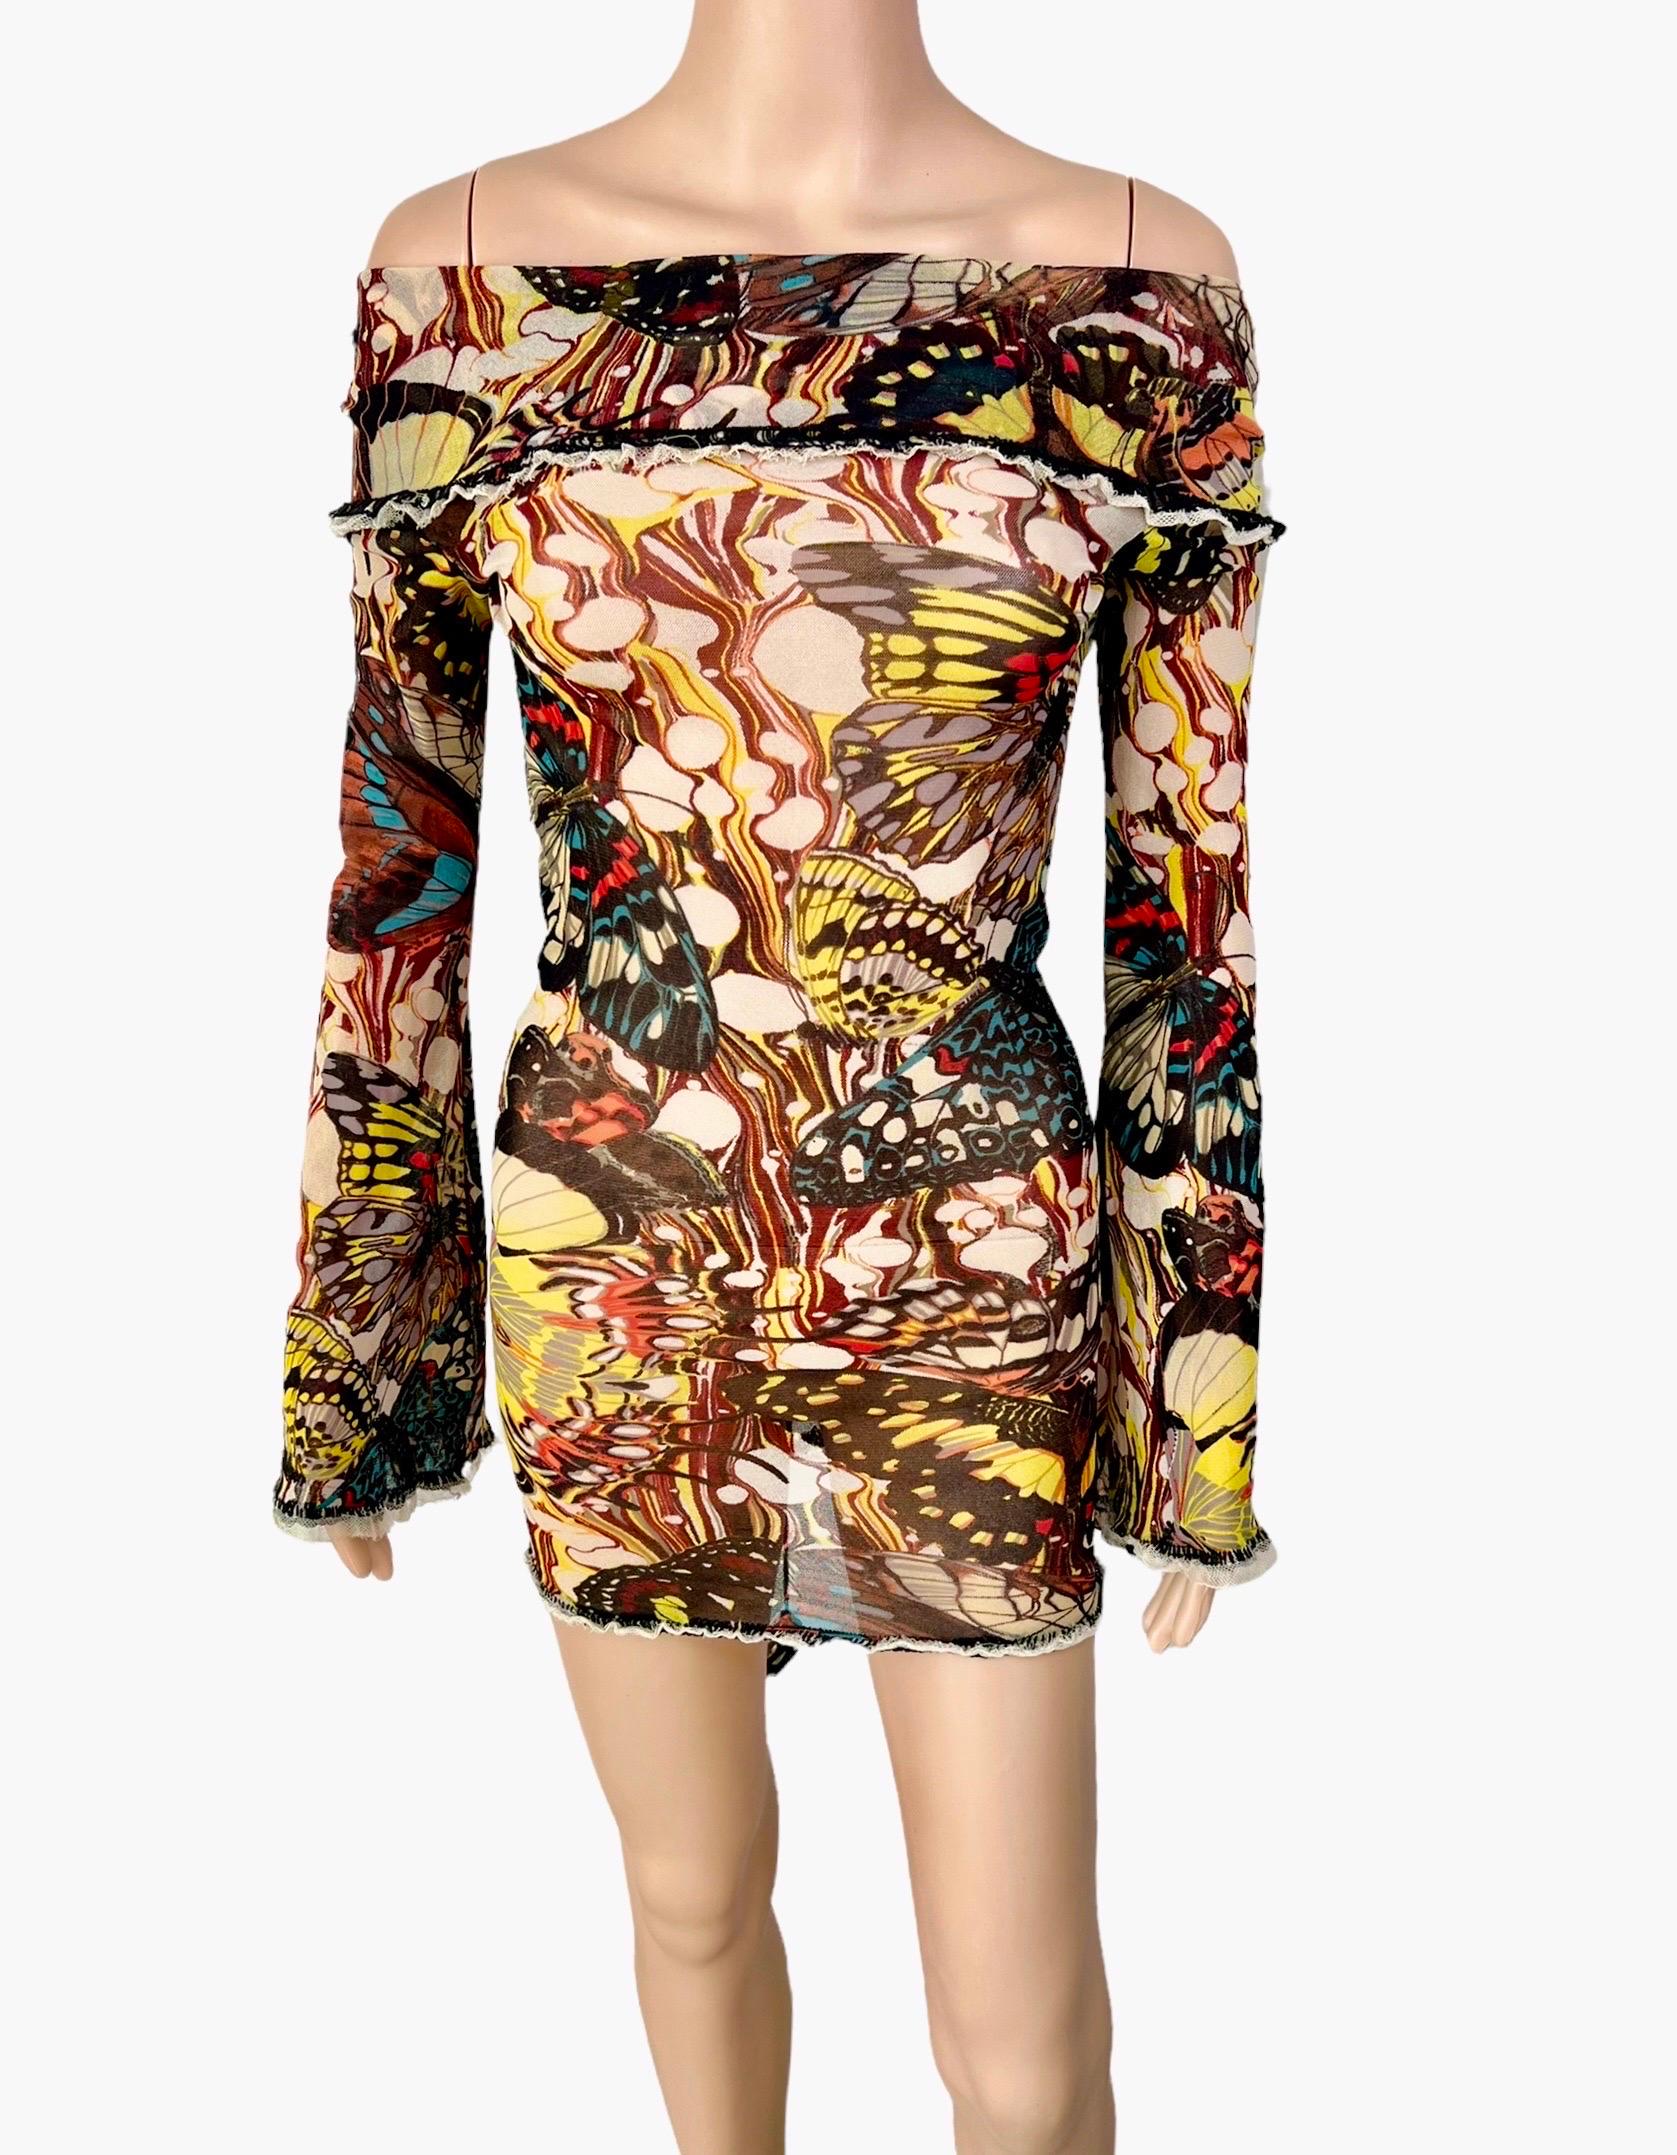 Jean Paul Gaultier S/S 2003 Vintage Butterfly Print Semi-Sheer Mesh Off Shoulder Bodycon Mini Dress Size S

Please note this dress is very versatile and it could be styled a few different ways based on preference, drawstring in the back is